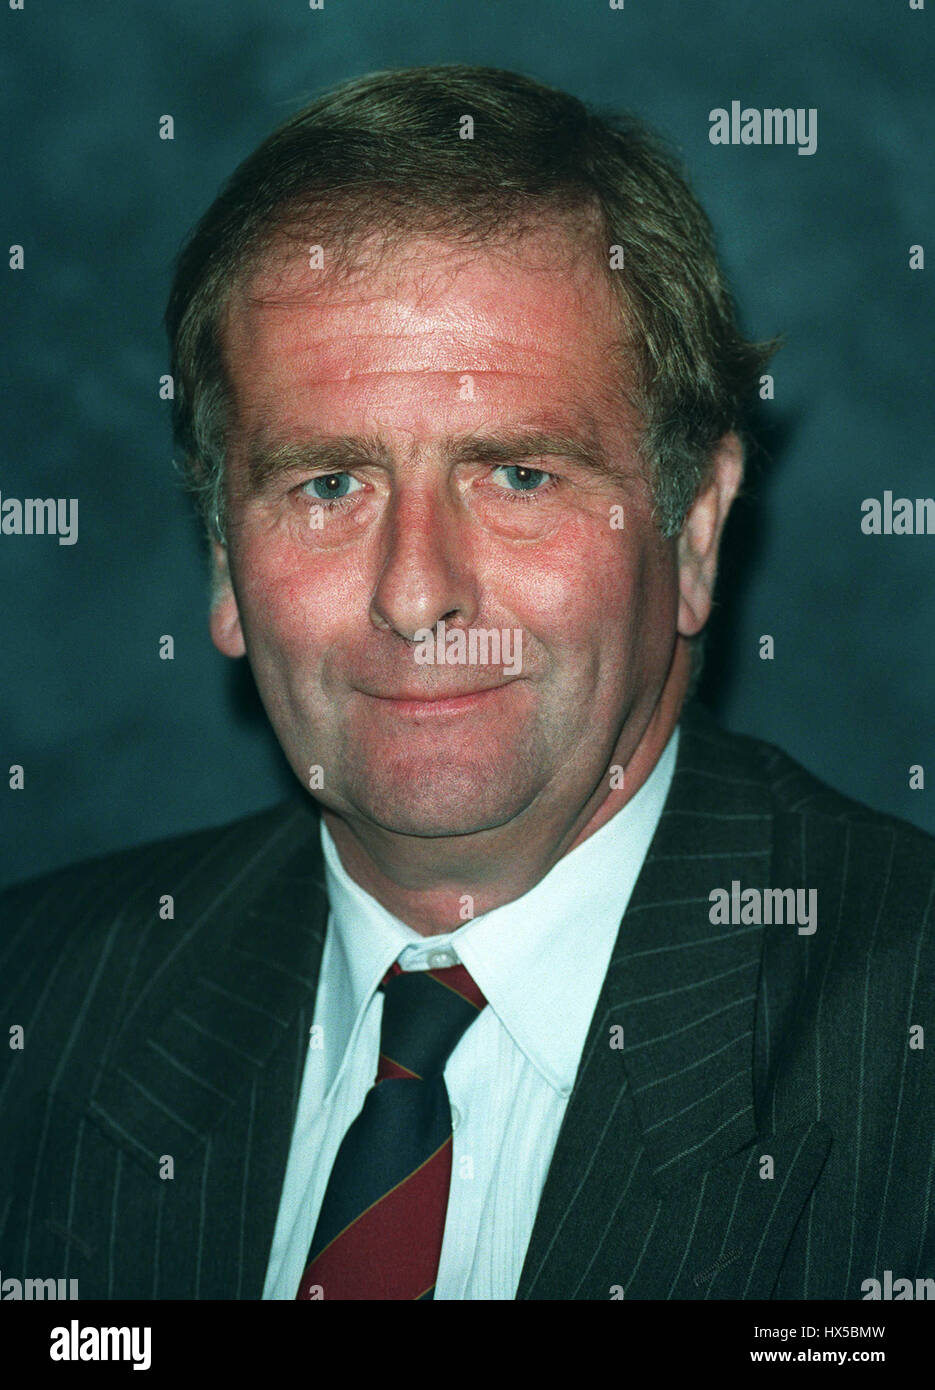 ROGER GALE MP CONSERVATIVE PARTY N. THANET 25 October 1994 Stock Photo